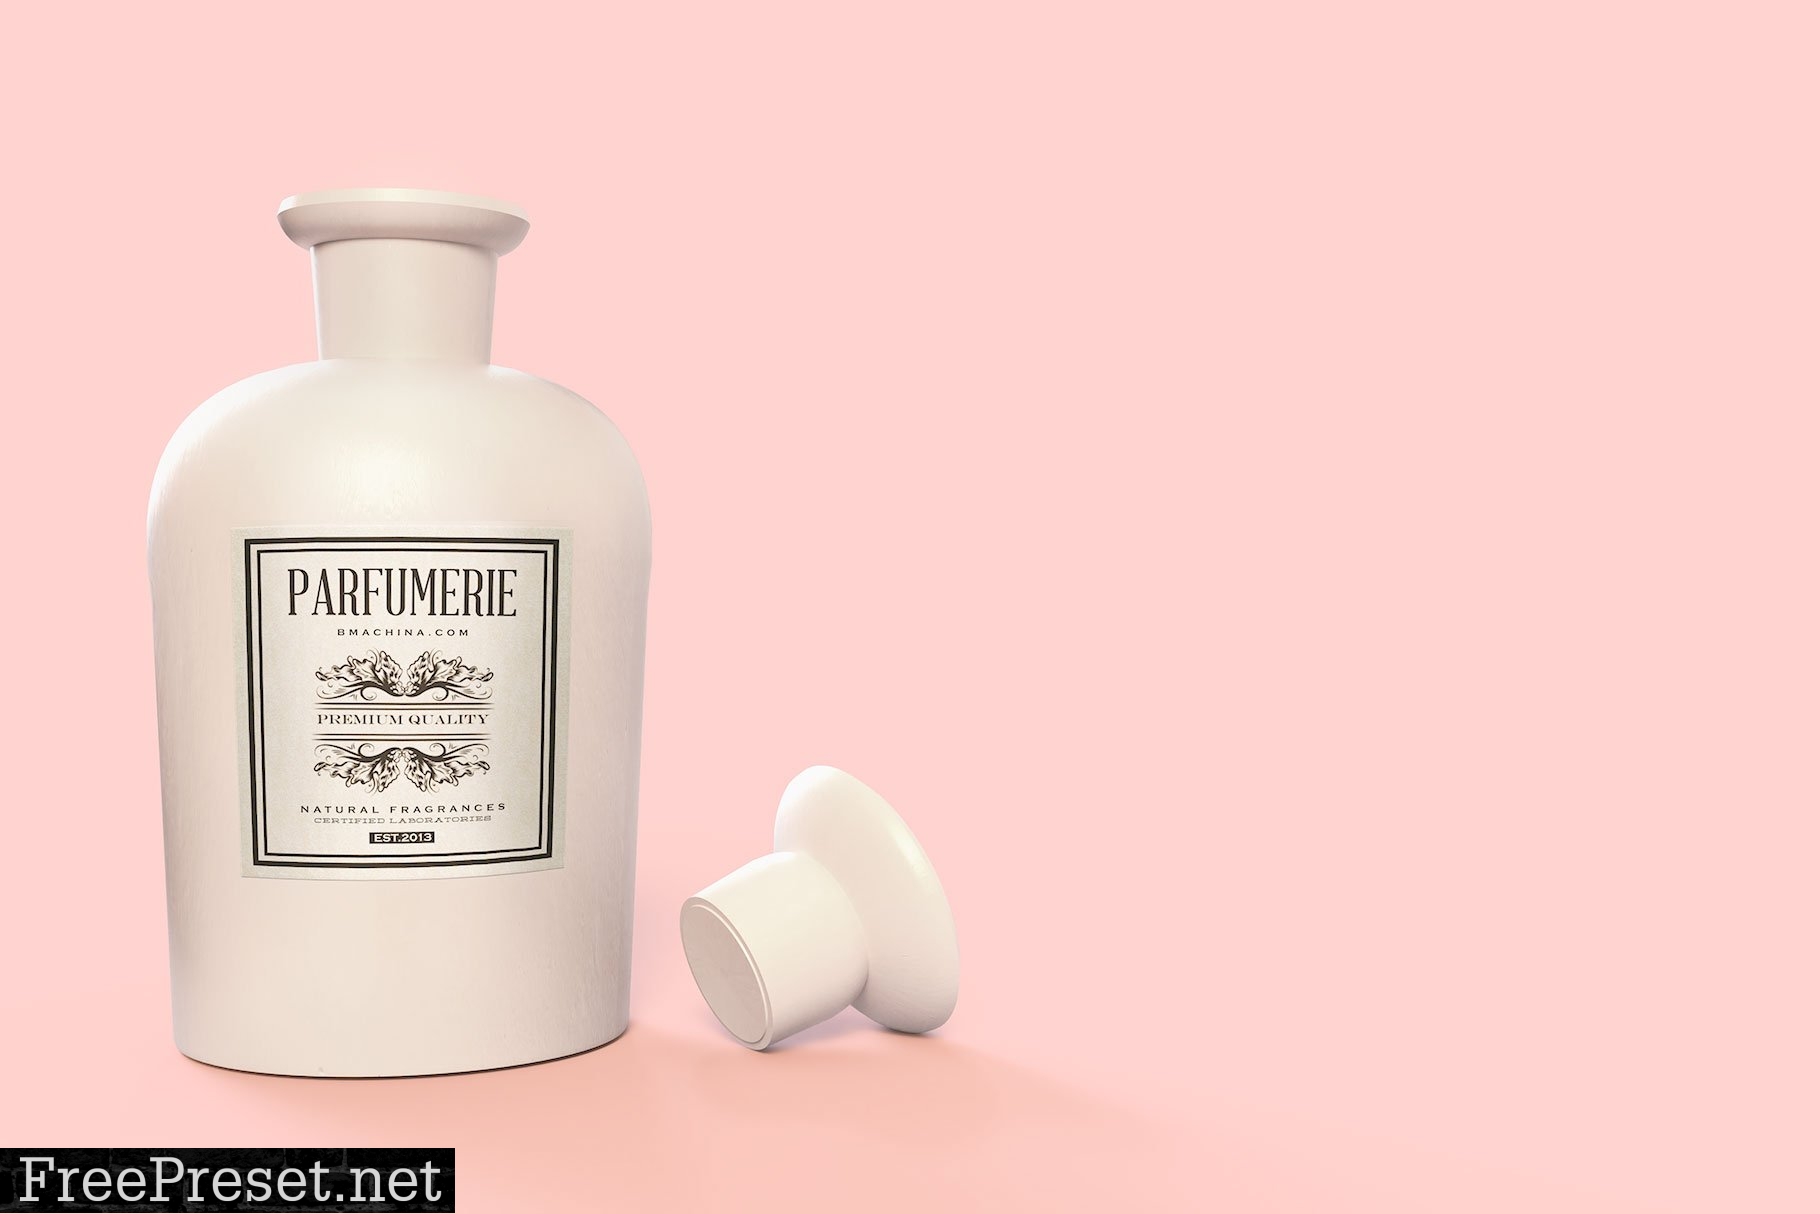 Pattern & Label Parfum Bottle Mockup 4517819A vintage pharmacy bottle to show off your designs with style or simply to see how they look like in different environment.  Pattern&Label Parfum Bottle Mockup  Pack includes 1 .psd files: 4500x3000 px, 300dpi and 1. PDF Help file; Changeable Label design via Smart Object; Changeable Bottle patterns via Smart Object Changeable background; Great pattern by Mariia (FleurArt):  https://creativemarket.com/FleurArt  *Patterns are not included in the main zip file;  *Logo design not included in the main zip file  *Photoshop CS4 or above required for editing Smart Objects